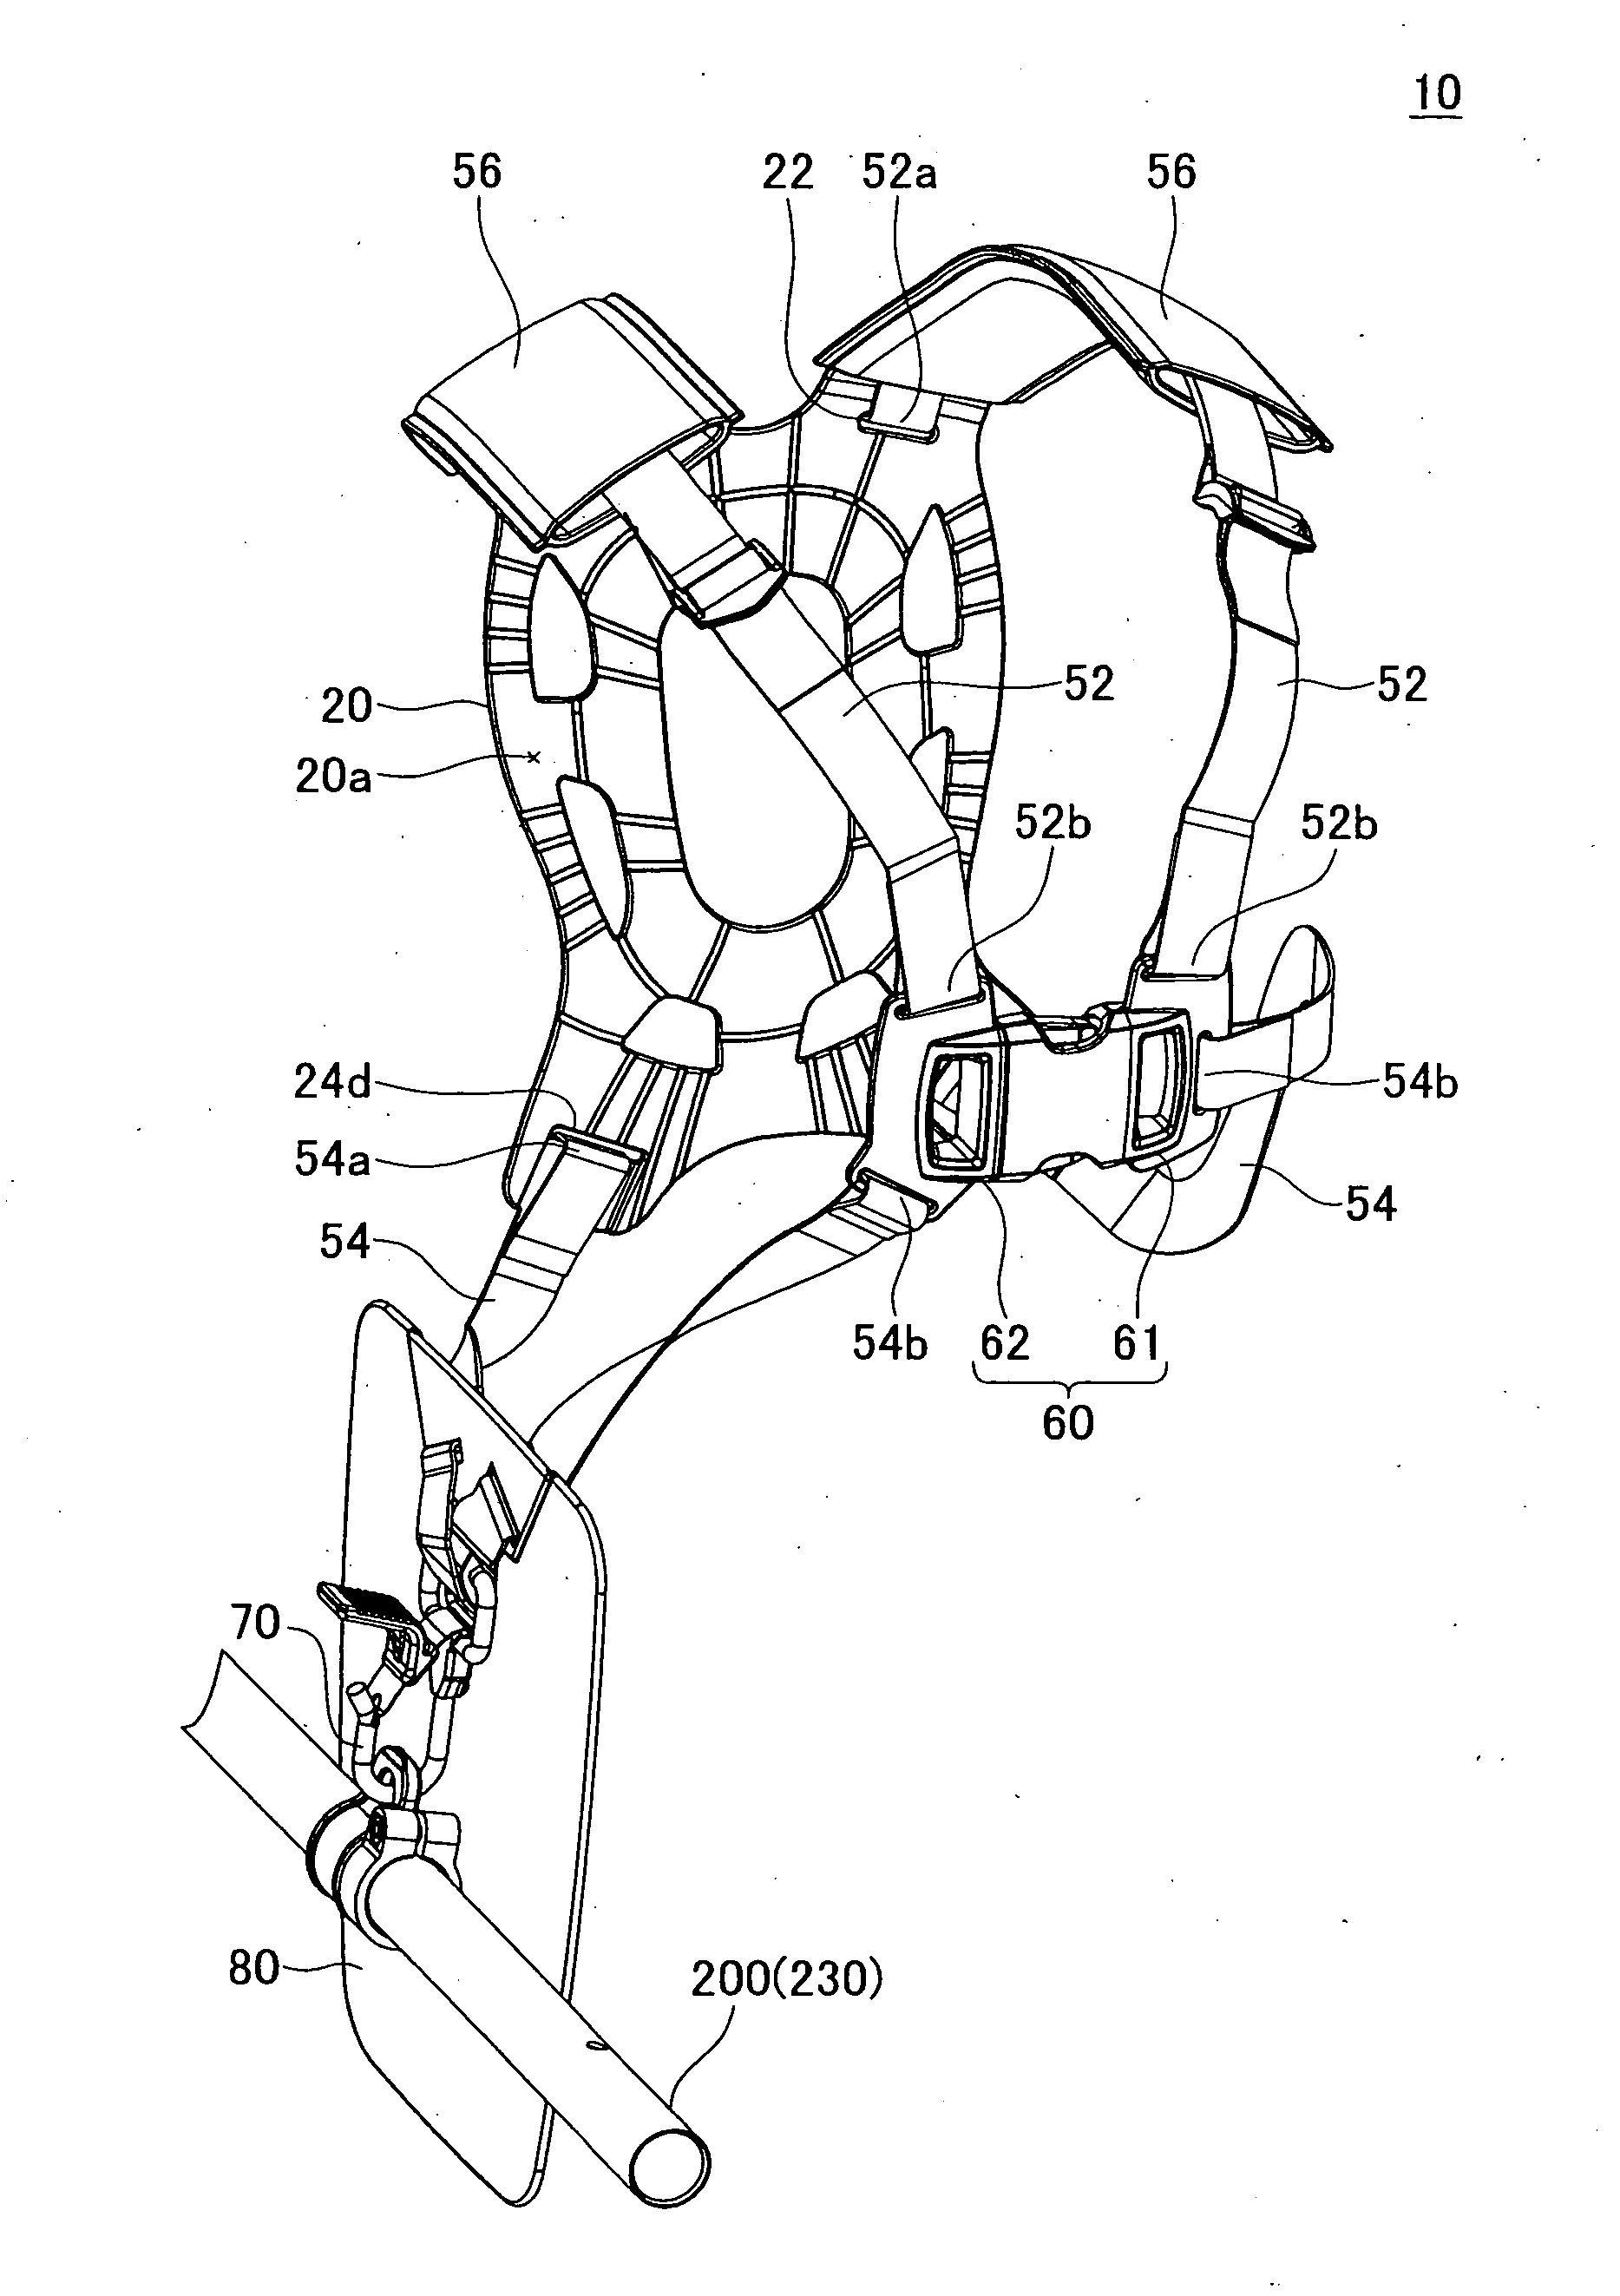 Harness for a handheld power equipment